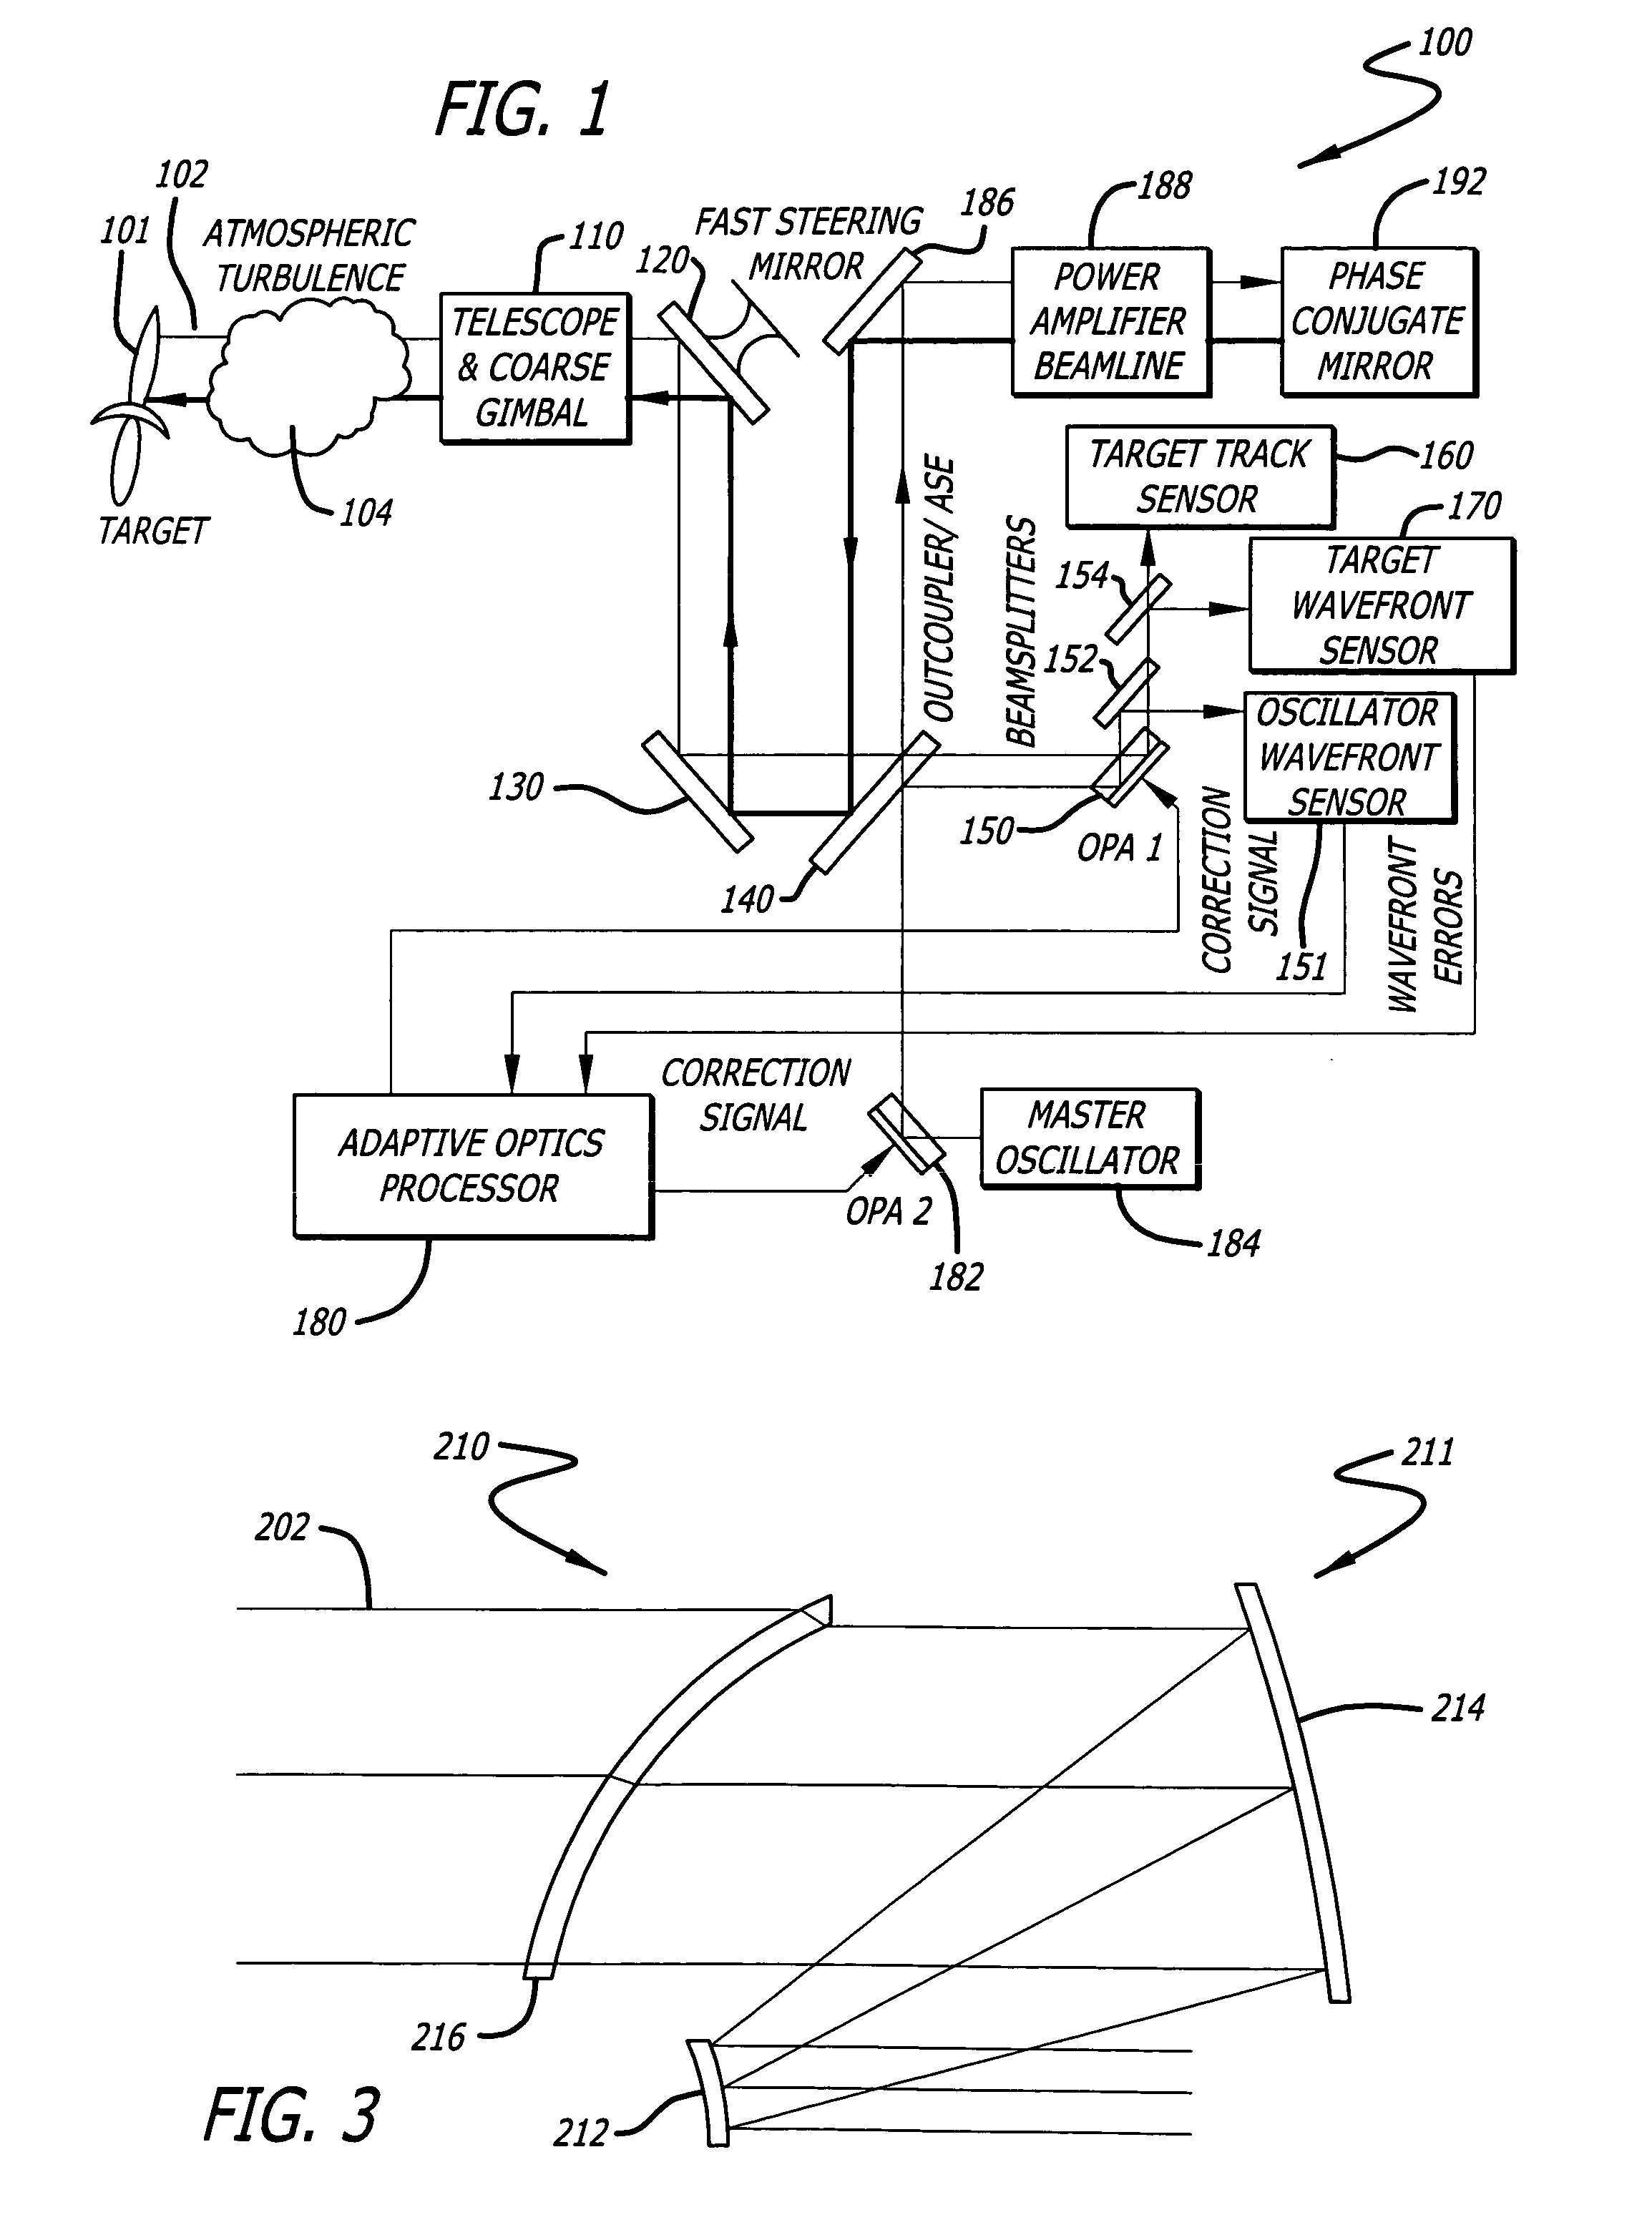 Beam director and control system for a high energy laser within a conformal window